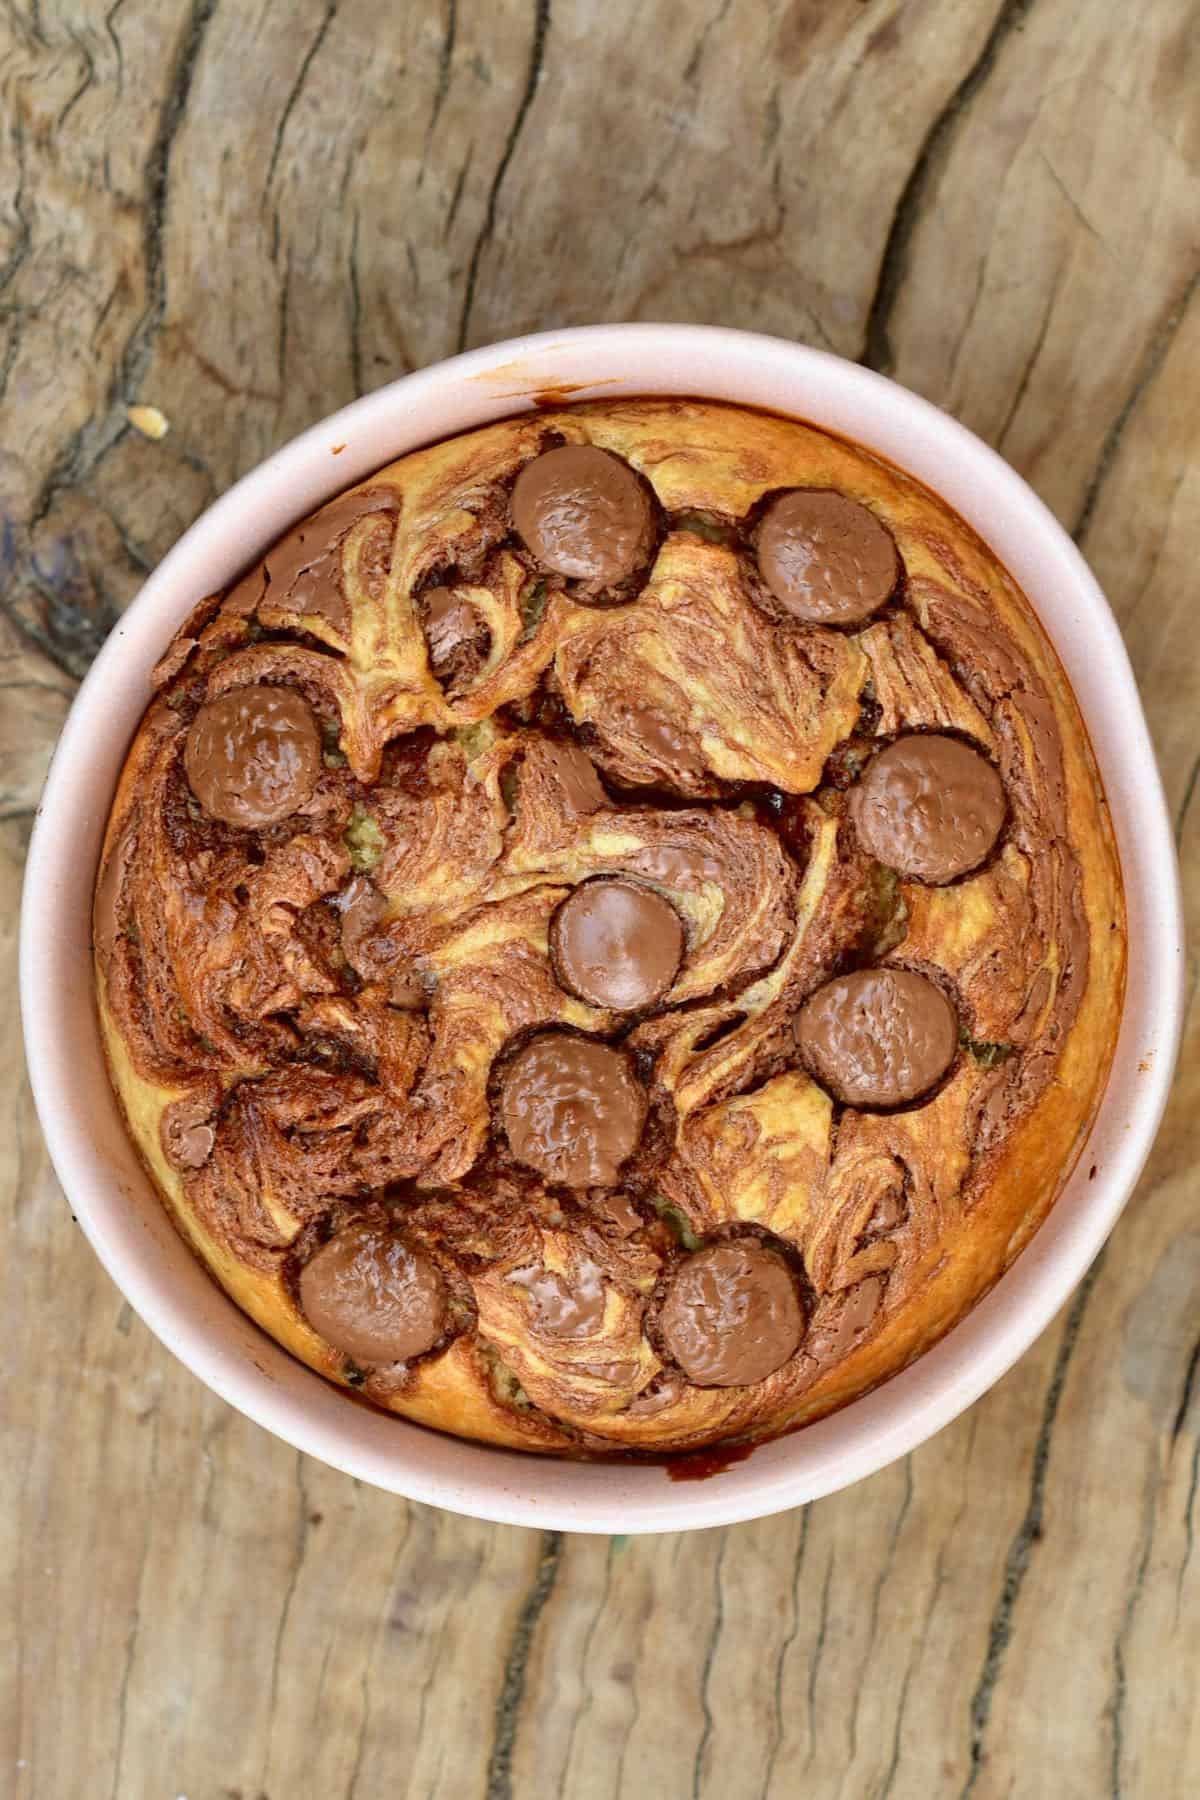 Baked oats with peanut butter and chocolate chips